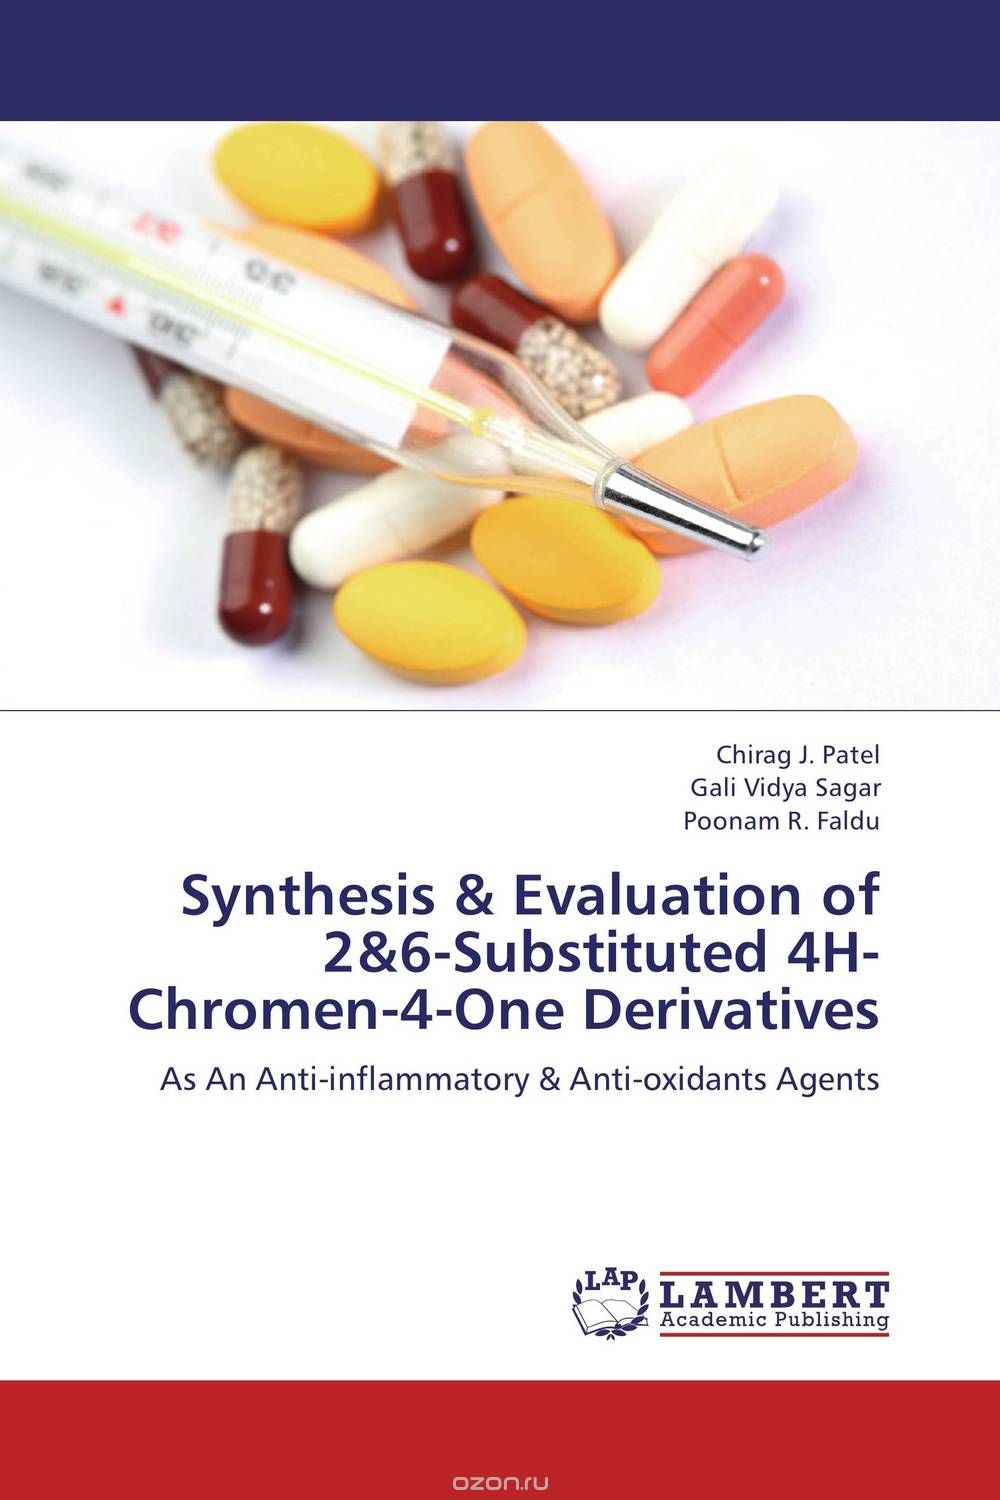 Synthesis & Evaluation of 2&6-Substituted 4H-Chromen-4-One Derivatives